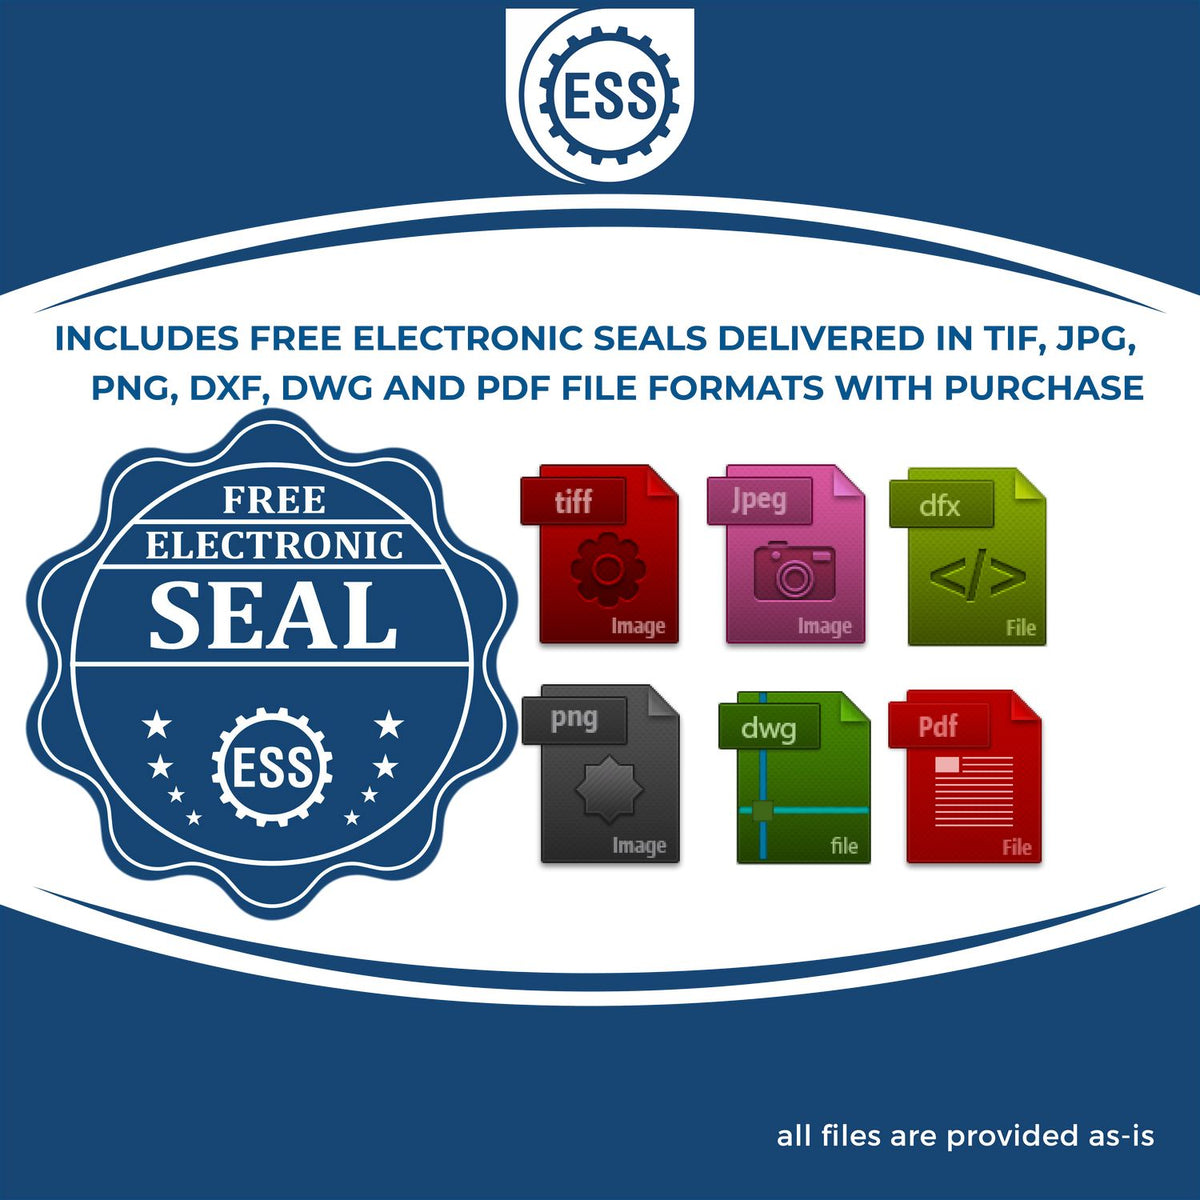 An infographic for the free electronic seal for the Soft Maine Professional Engineer Seal illustrating the different file type icons such as DXF, DWG, TIF, JPG and PNG.